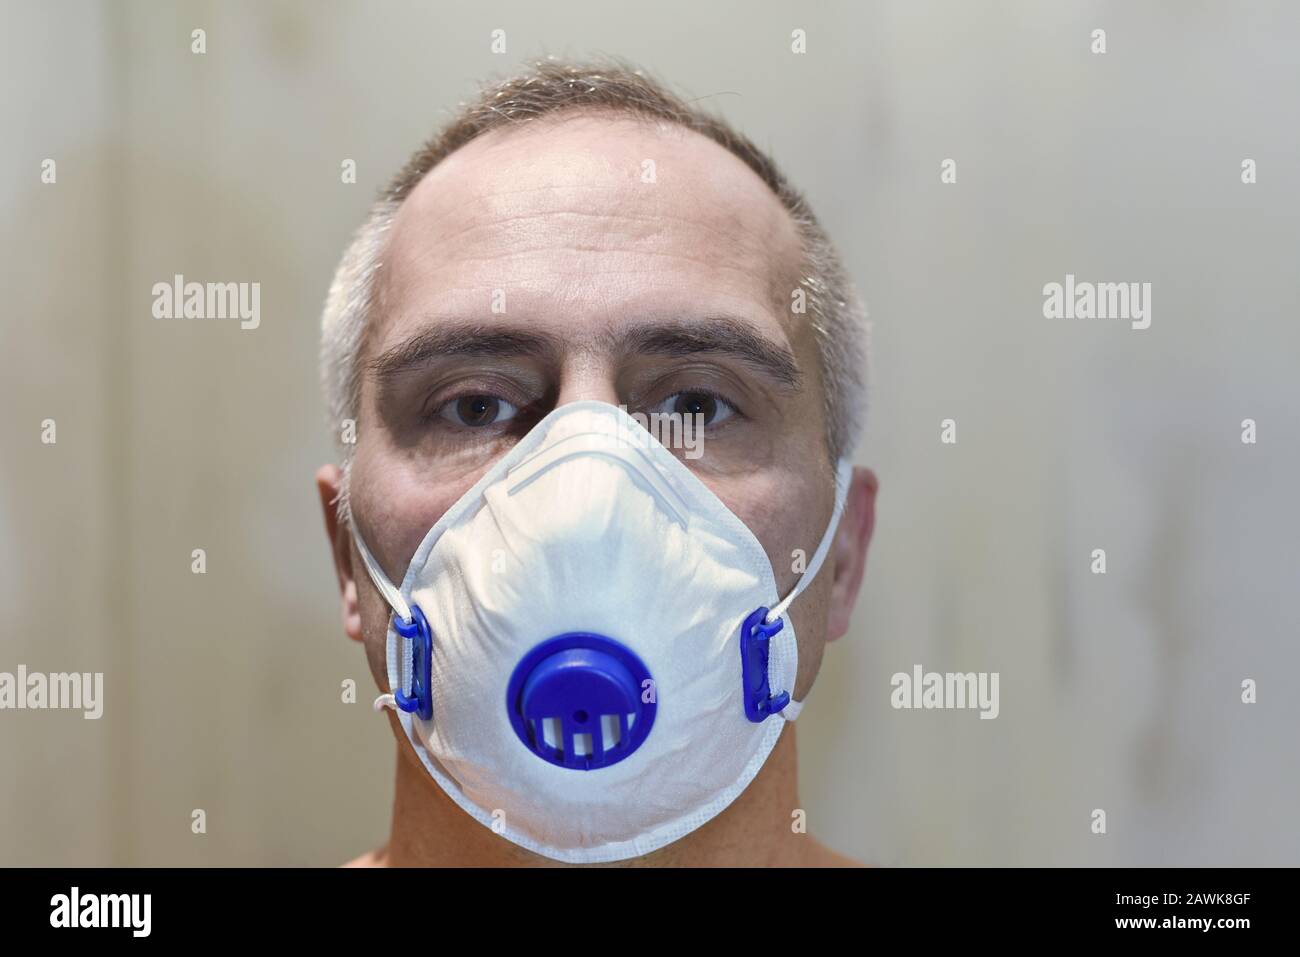 man face with protective medical mask, filter respirator,  concept of fine dust pollution, viral infection, outbreak of coronavirus, epidemic, healthc Stock Photo